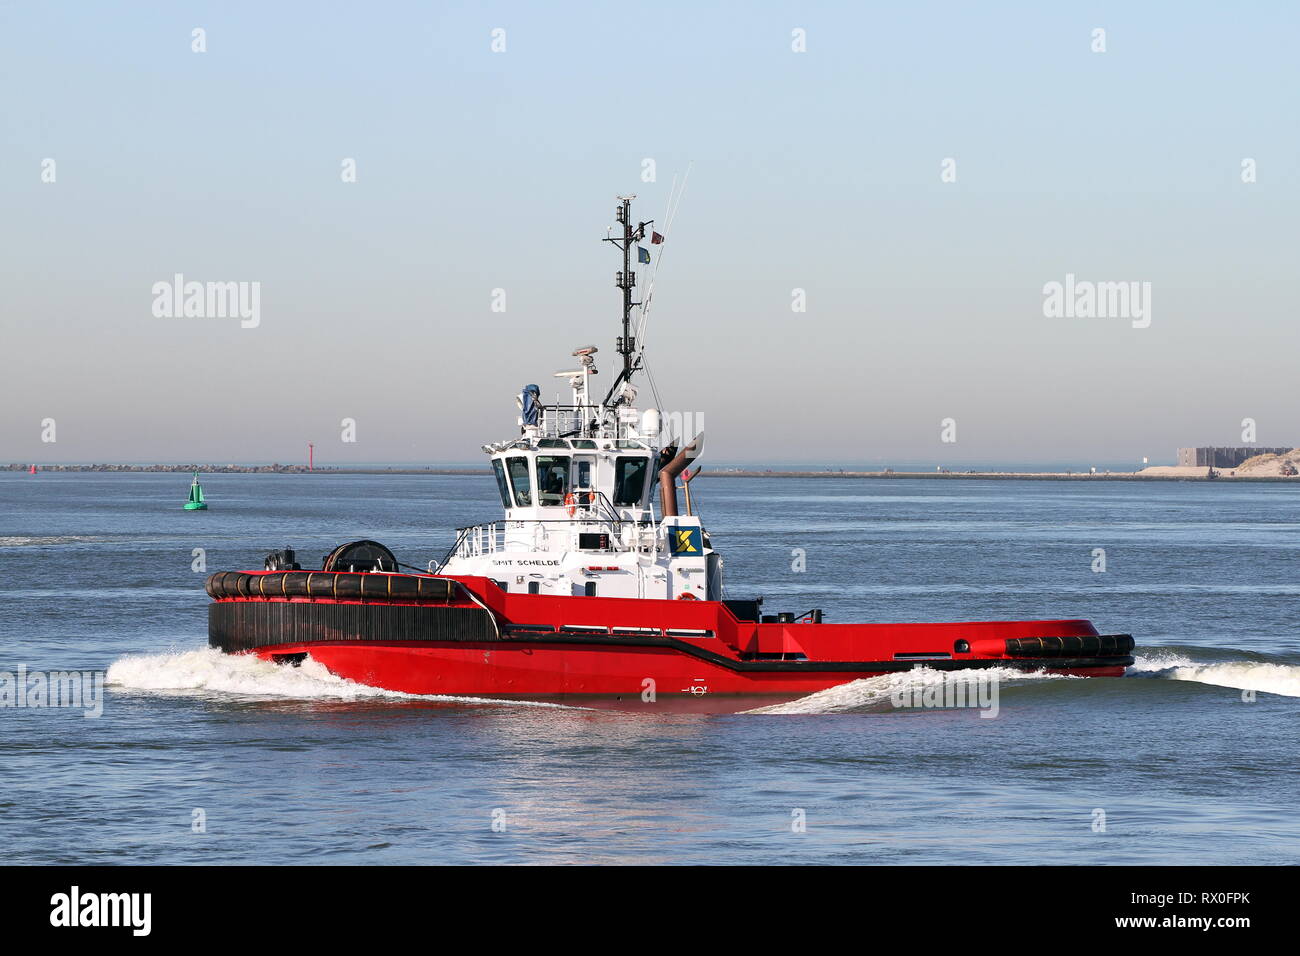 The harbor tug Smit Schelde works on 15 February 2019 in the port of Rotterdam. Stock Photo